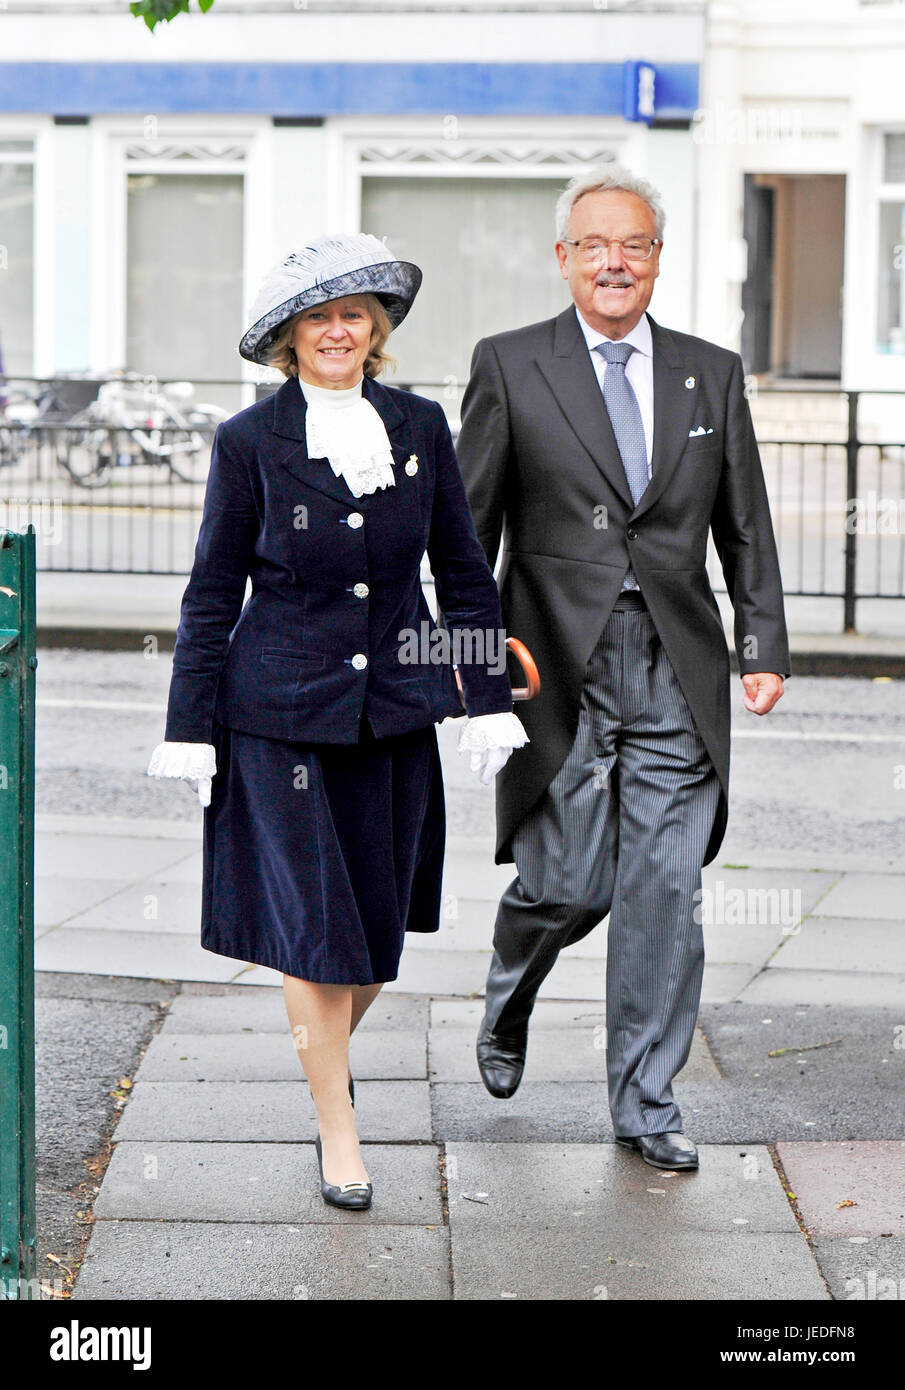 Brighton, UK. 24th June, 2017. The High Sheriff of East Sussex Maurenn Chowen arrives with her husband Michael for An Act of Remembrance for Armed Forces Day is held at the Brighton War memorial in the Old Steine organised by the Royal British Legion Credit: Simon Dack/Alamy Live News Stock Photo